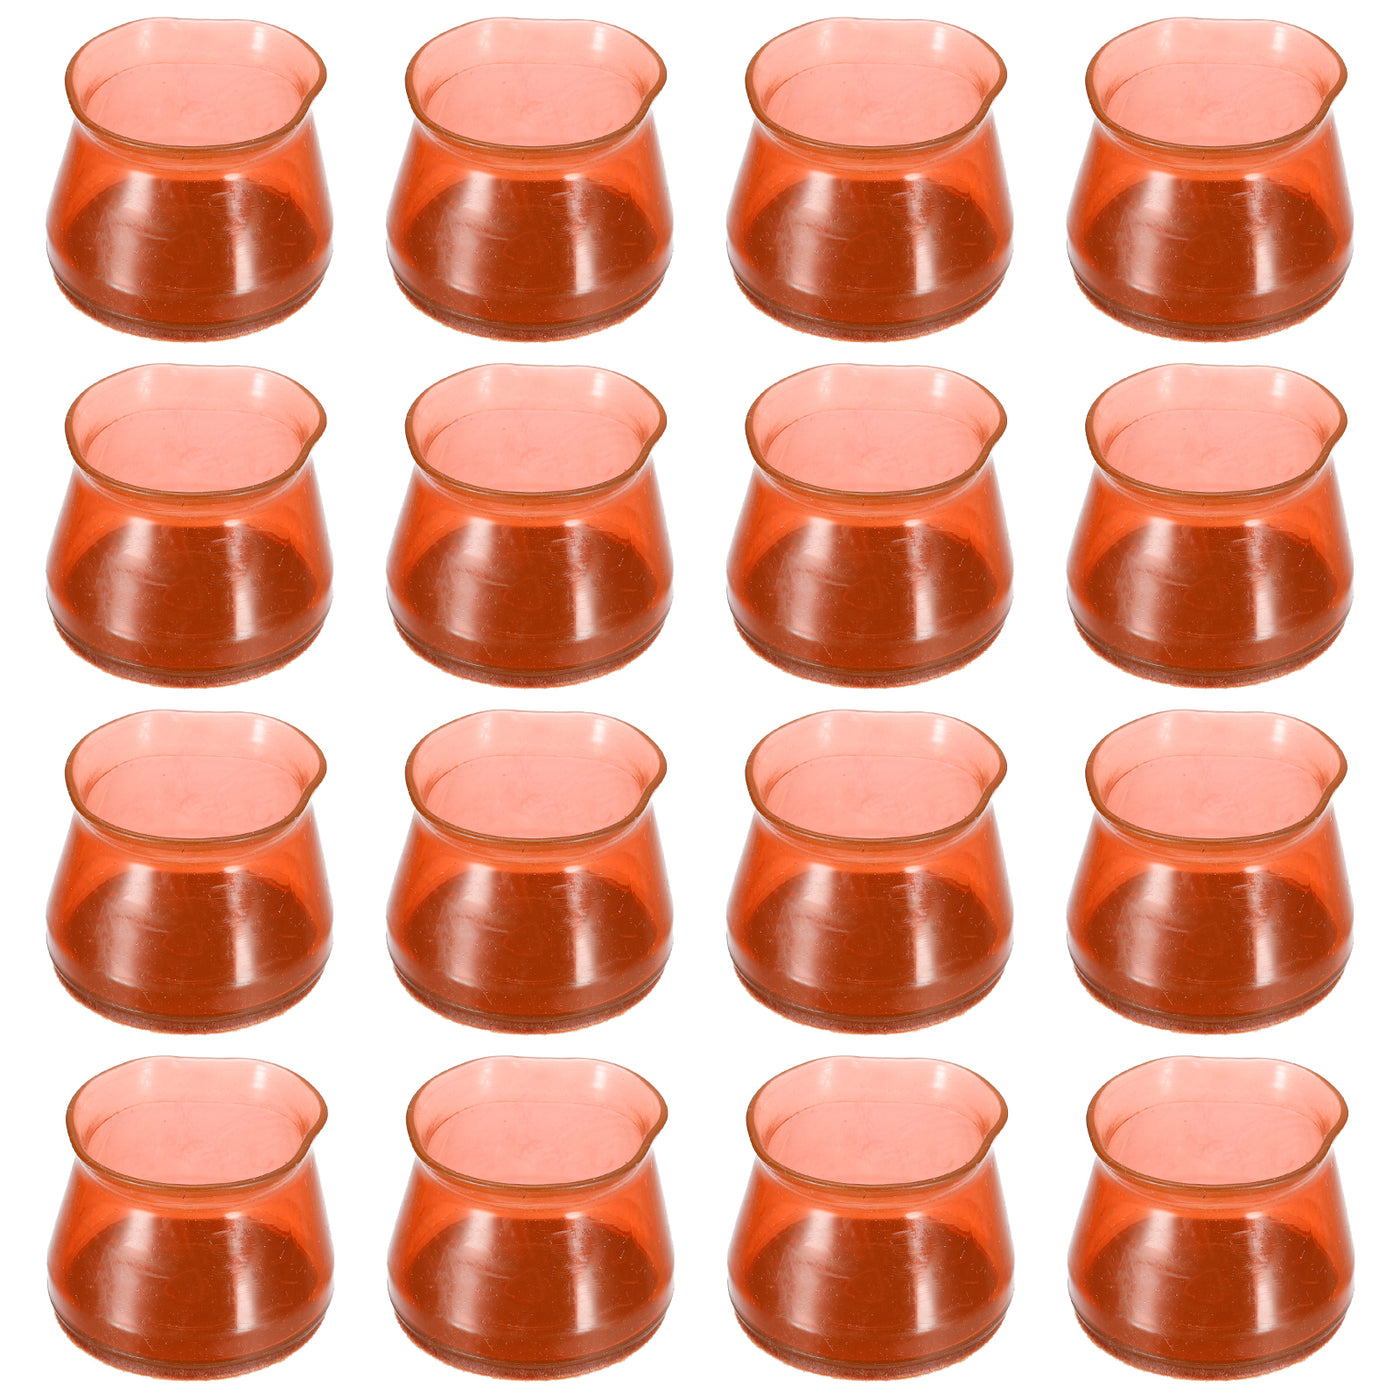 uxcell Uxcell Chair Leg Floor Protectors, 16Pcs 49mm/ 1.93" Silicone & Felt Chair Leg Cover Caps for Hardwood Floors (Clear Walnut)